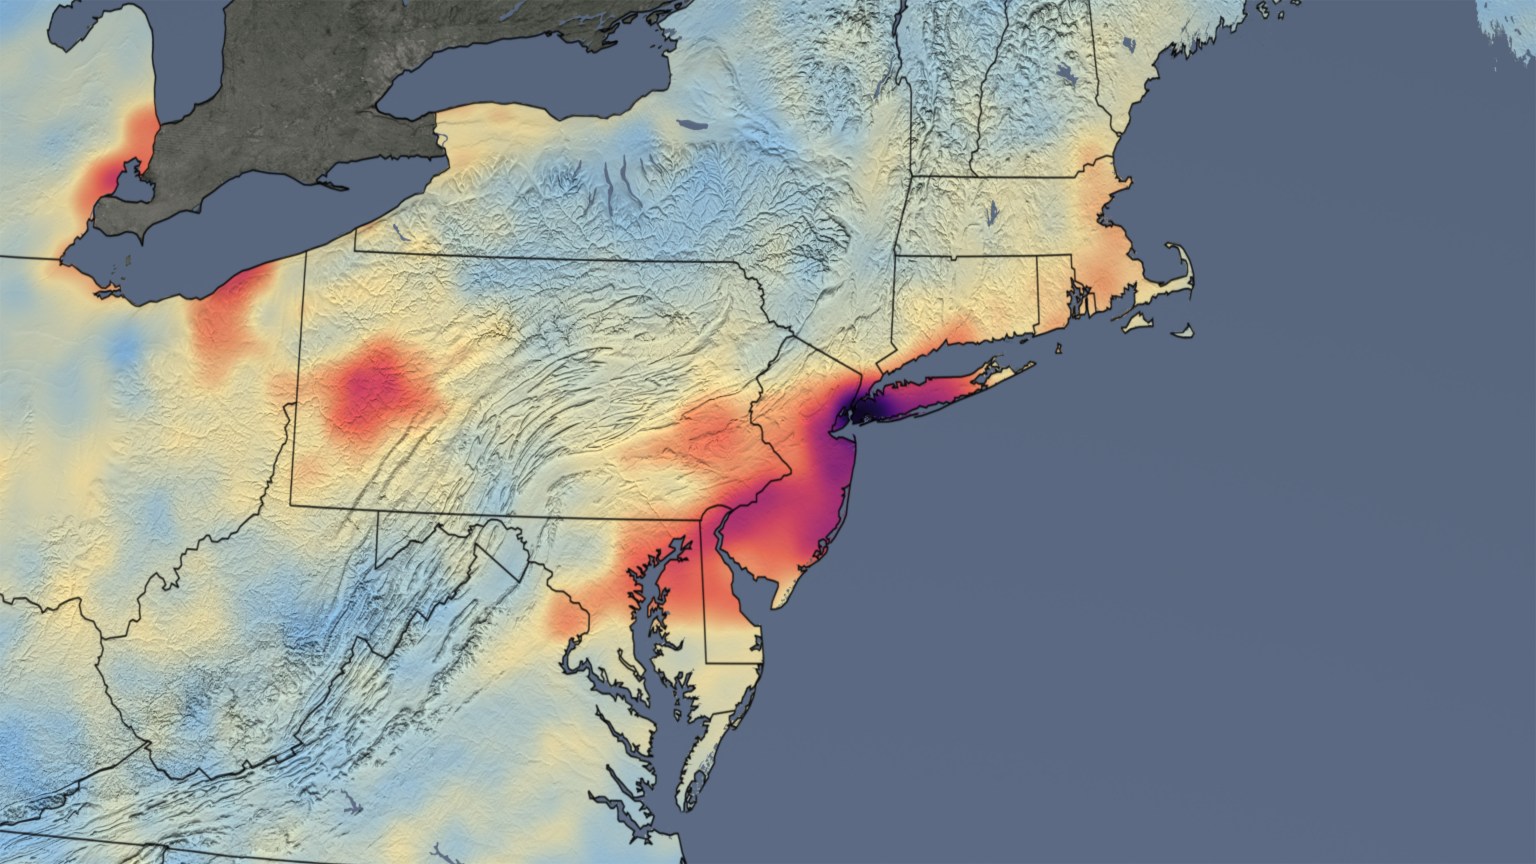 map showing air pollution, specifically tropospheric nitrogen dioxide (NO2), over the Northeast United States, the purple area indicates greatest density and is in New York City